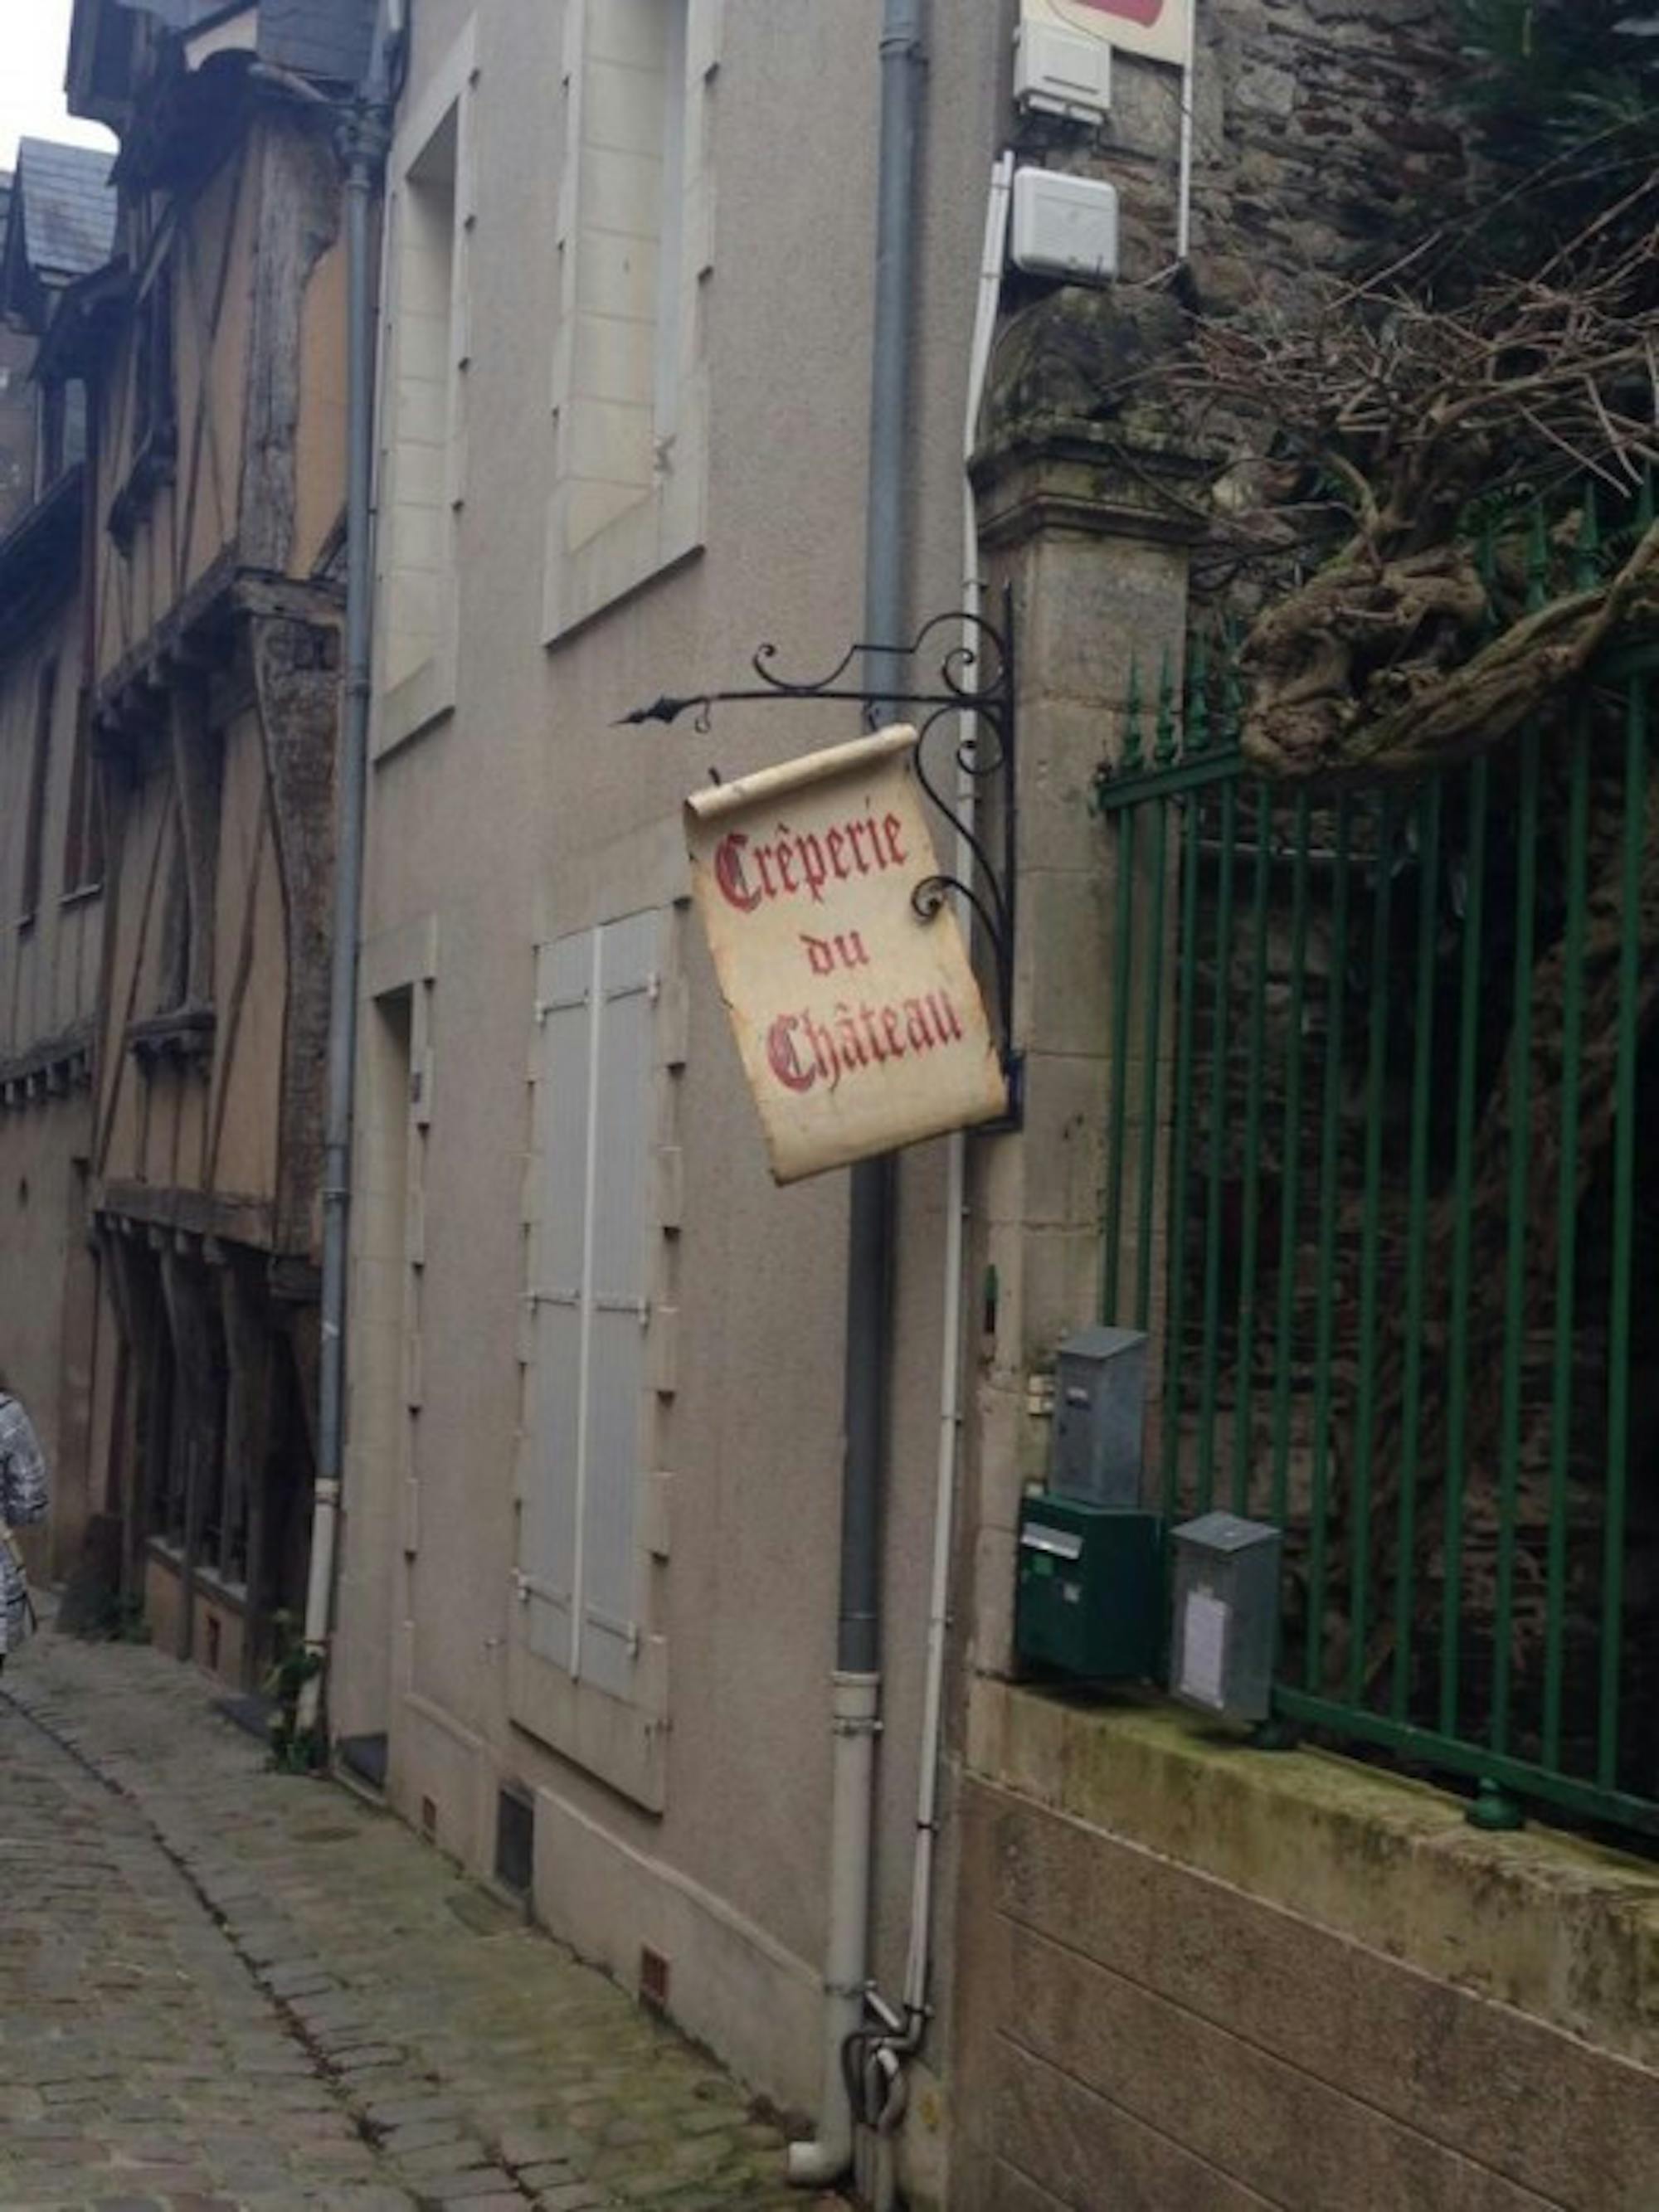 Out of the countless crêperies in Angers, the Crêperie du Chatateau is the most popular due to its cozy, quaint atmosphere and location directly across the street from the Chateau d'Angers.